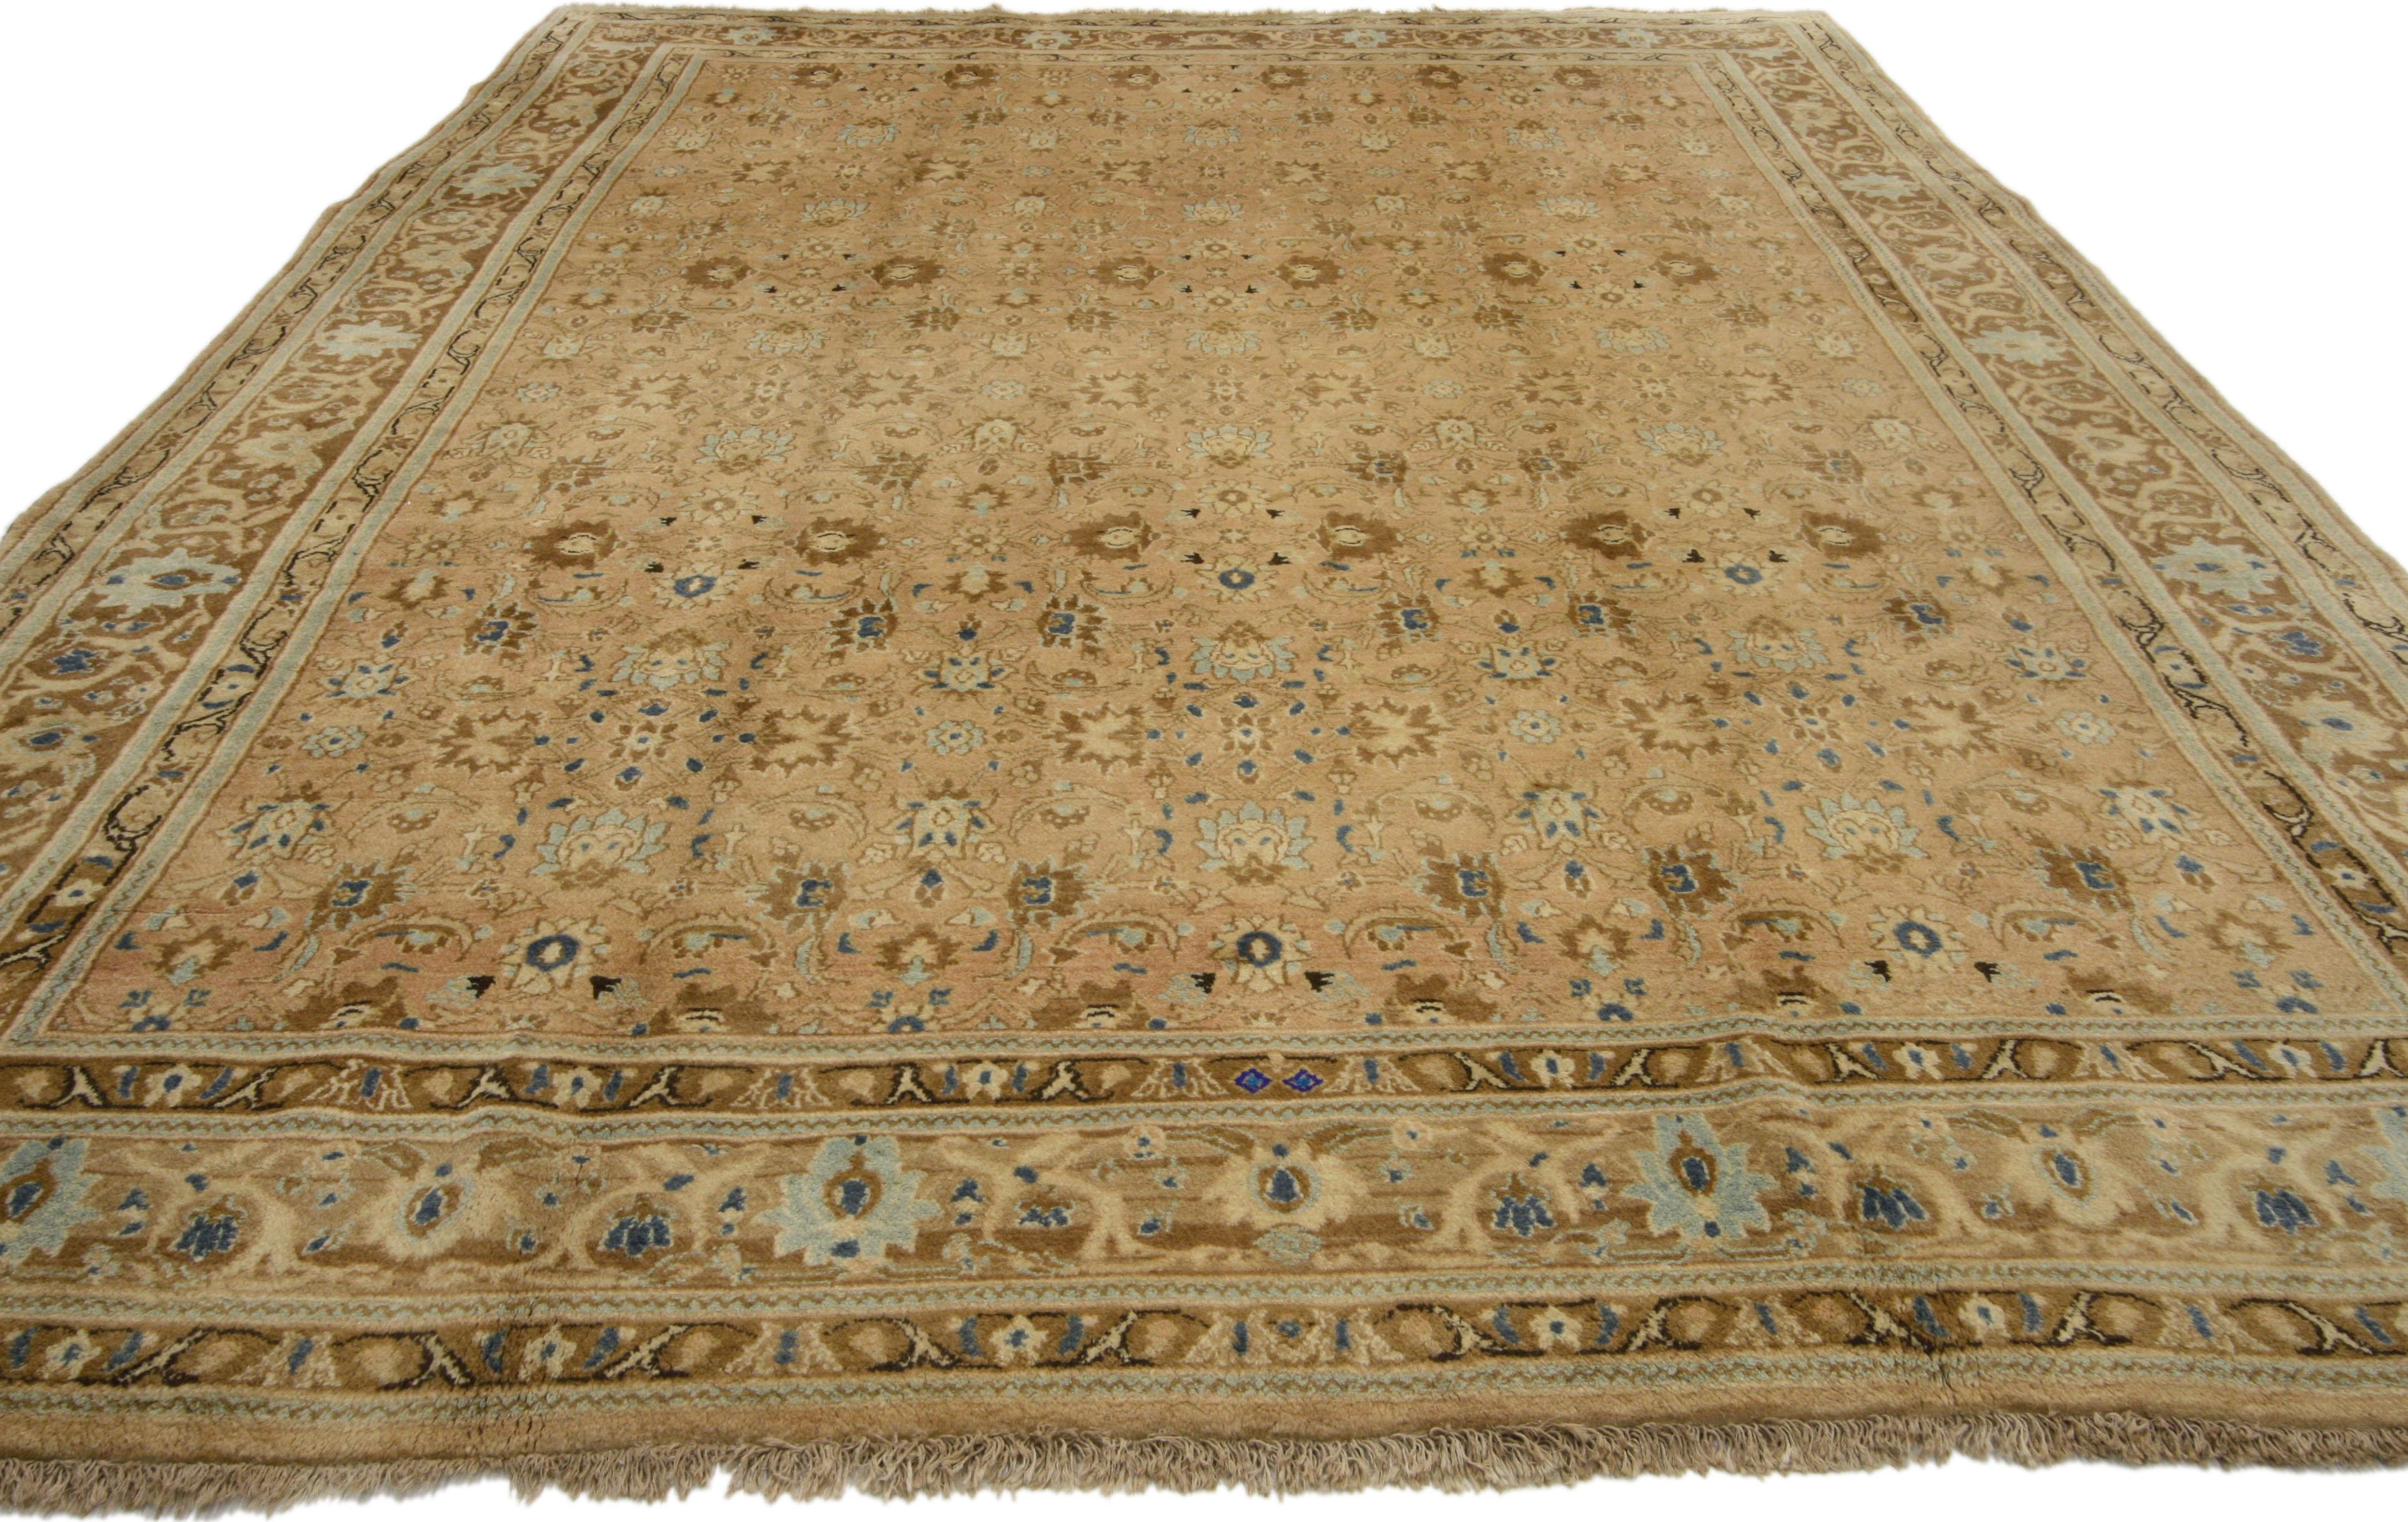 76144 Colonial Revival style vintage Persian Mashhad rug with warm, neutral colors. This hand knotted wool vintage Persian Mashhad rug features an all-over Shah Abbasi pattern spread across an abrashed field. The ancient floral Shah Abbasi motif